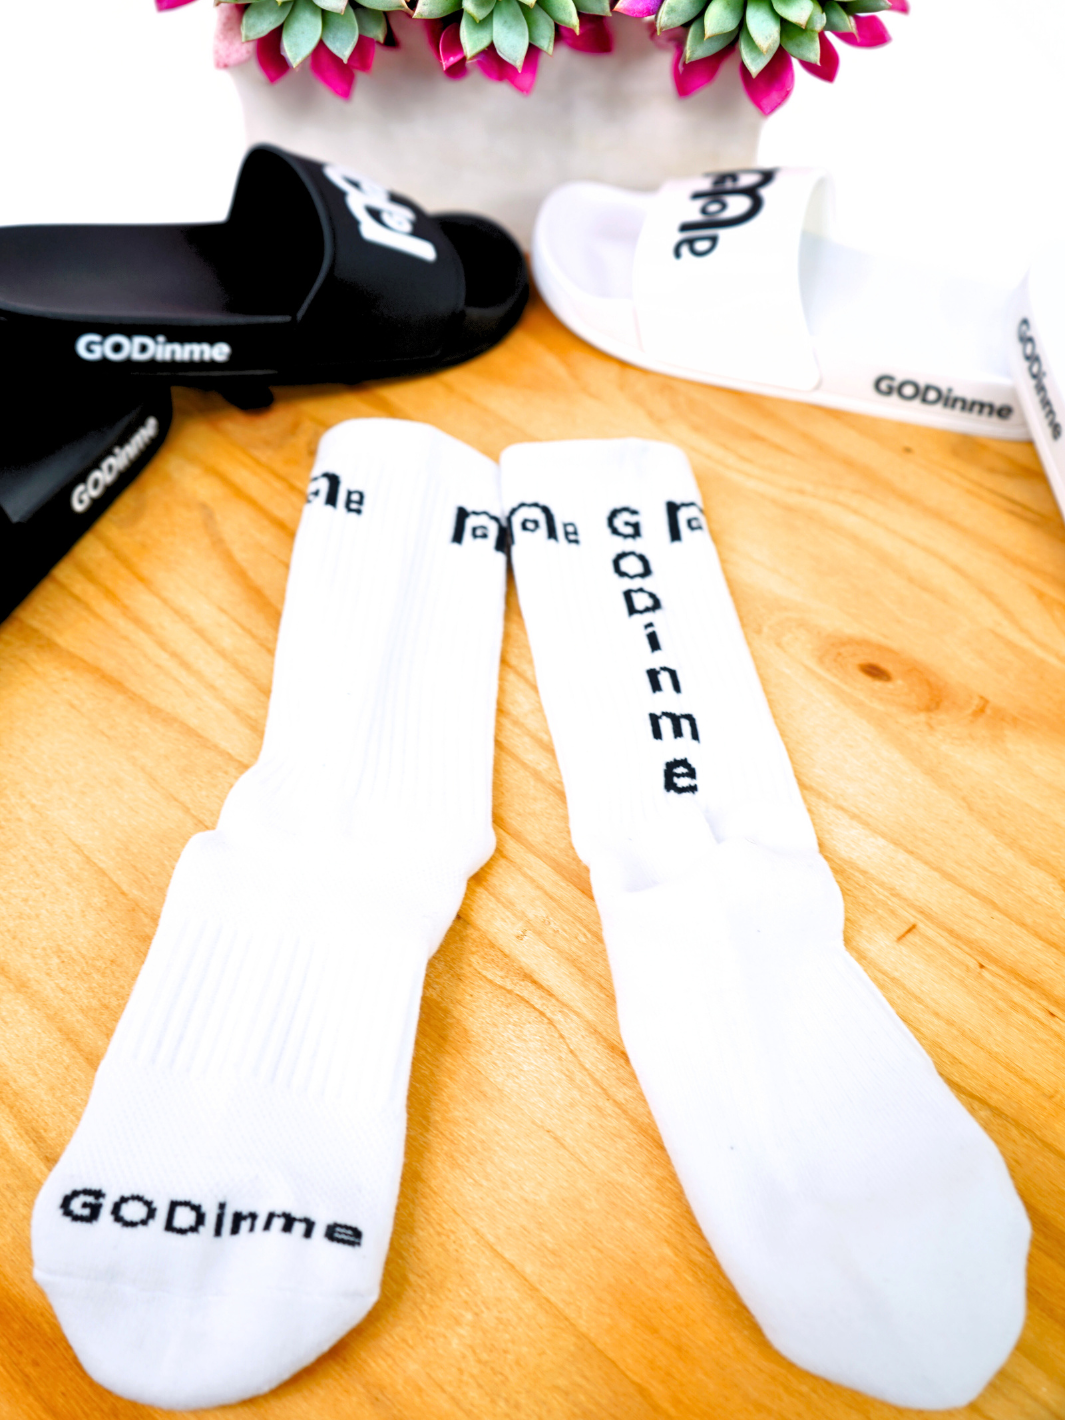 High quality White Athletic Socks feature the powerful GODinme logo on each side, and GODinme name at toes and also at back achilles area to provide the confidence and motivation to reach your fitness goals.